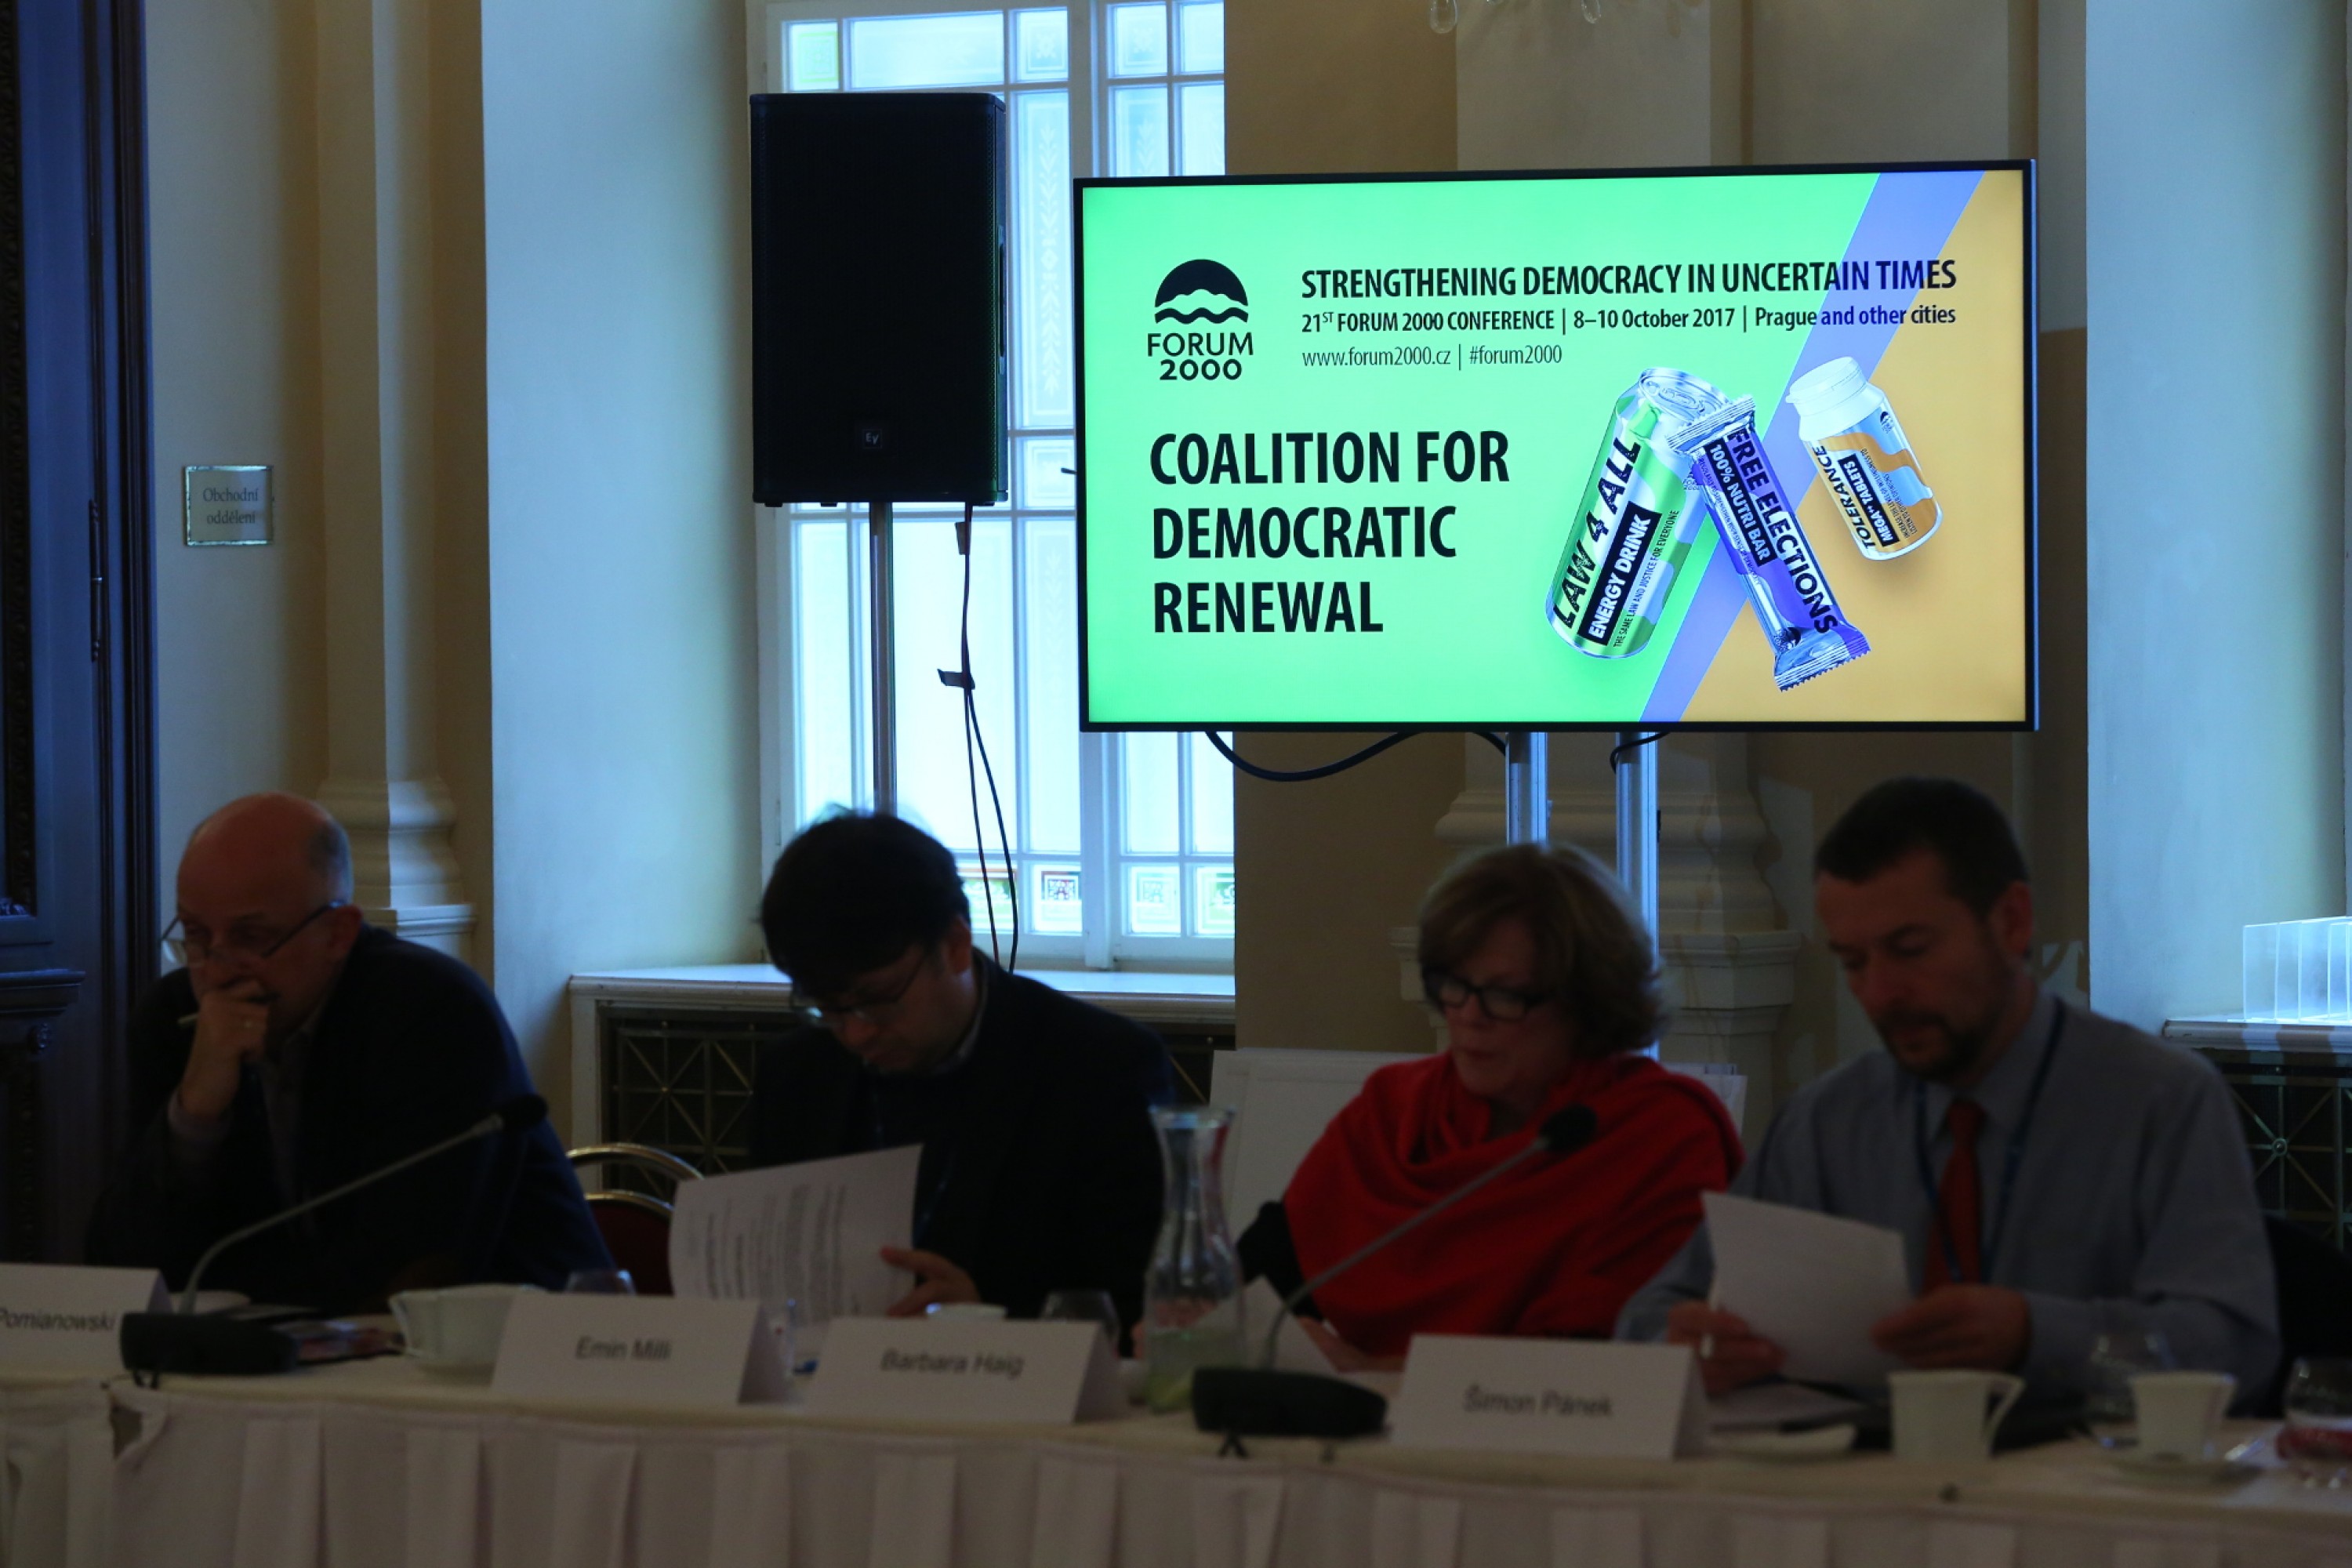 Presentation of the Coalition for Democratic Renewal at Forum 2000. Photo: forum2000.cz